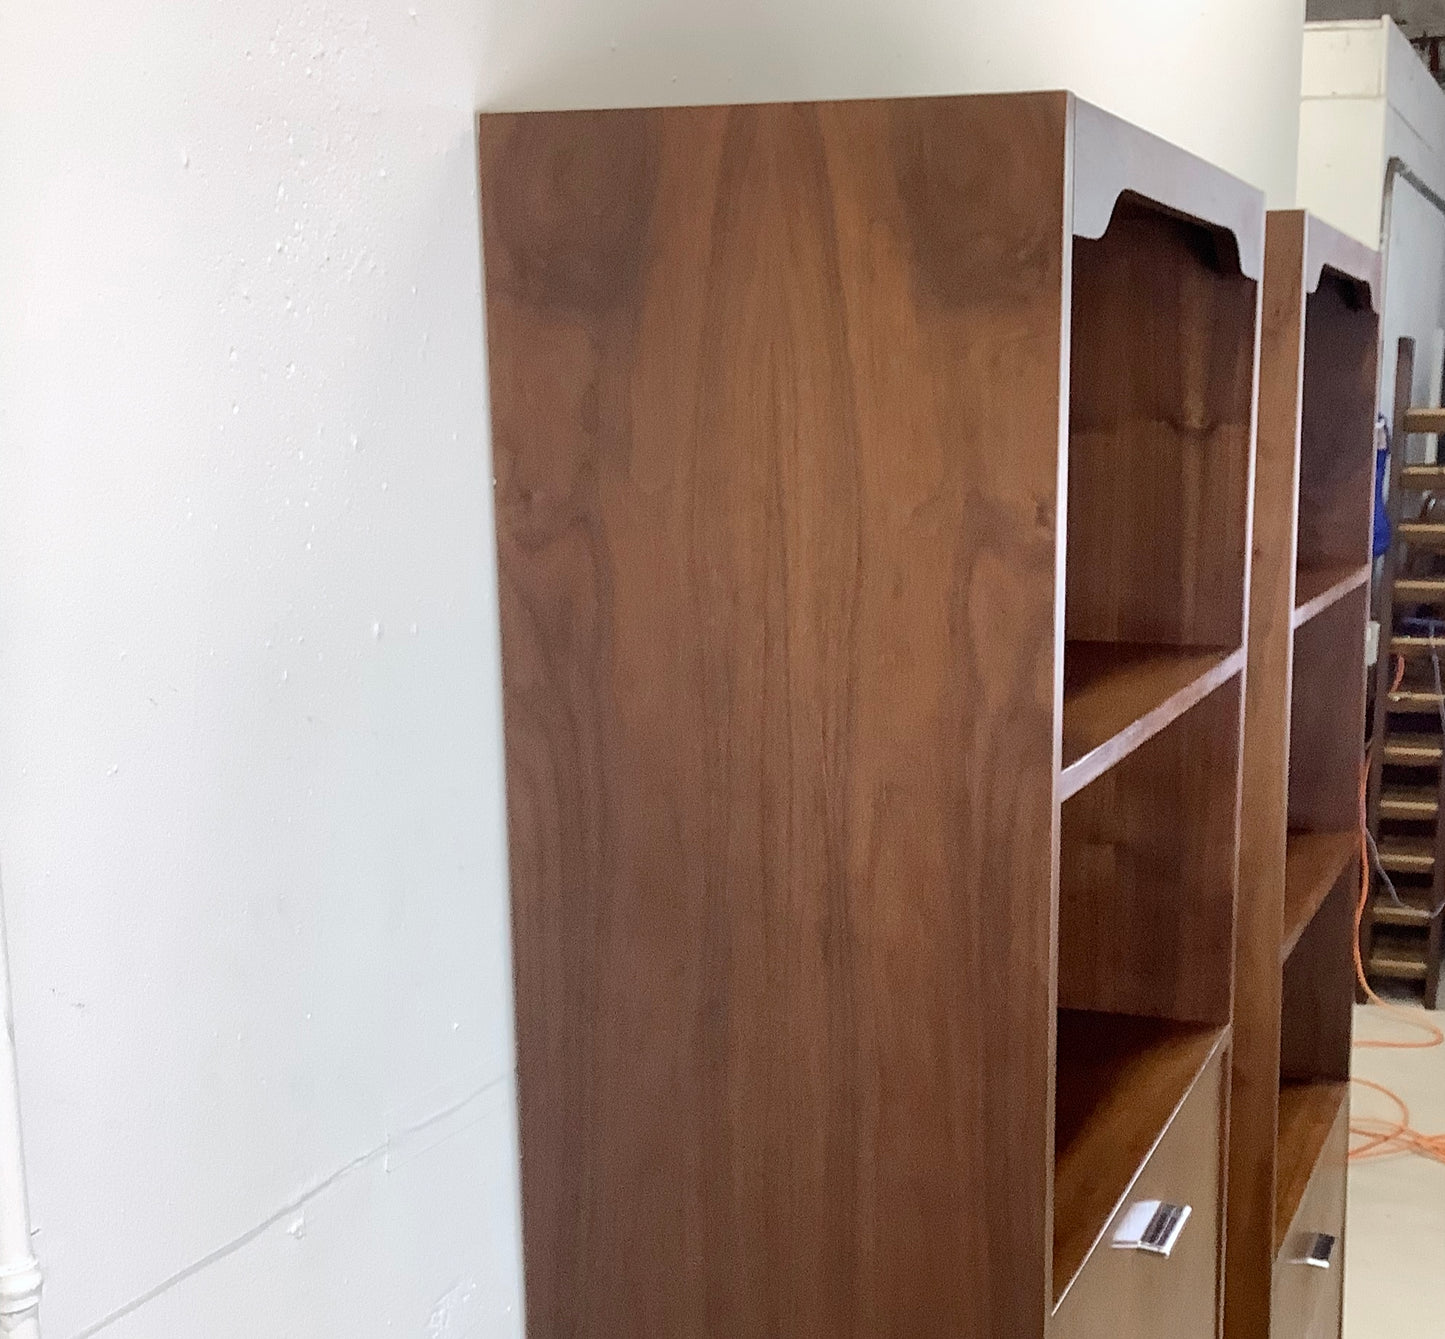 Pair Tall Vintage Standing Shelves With Bar and Drawers